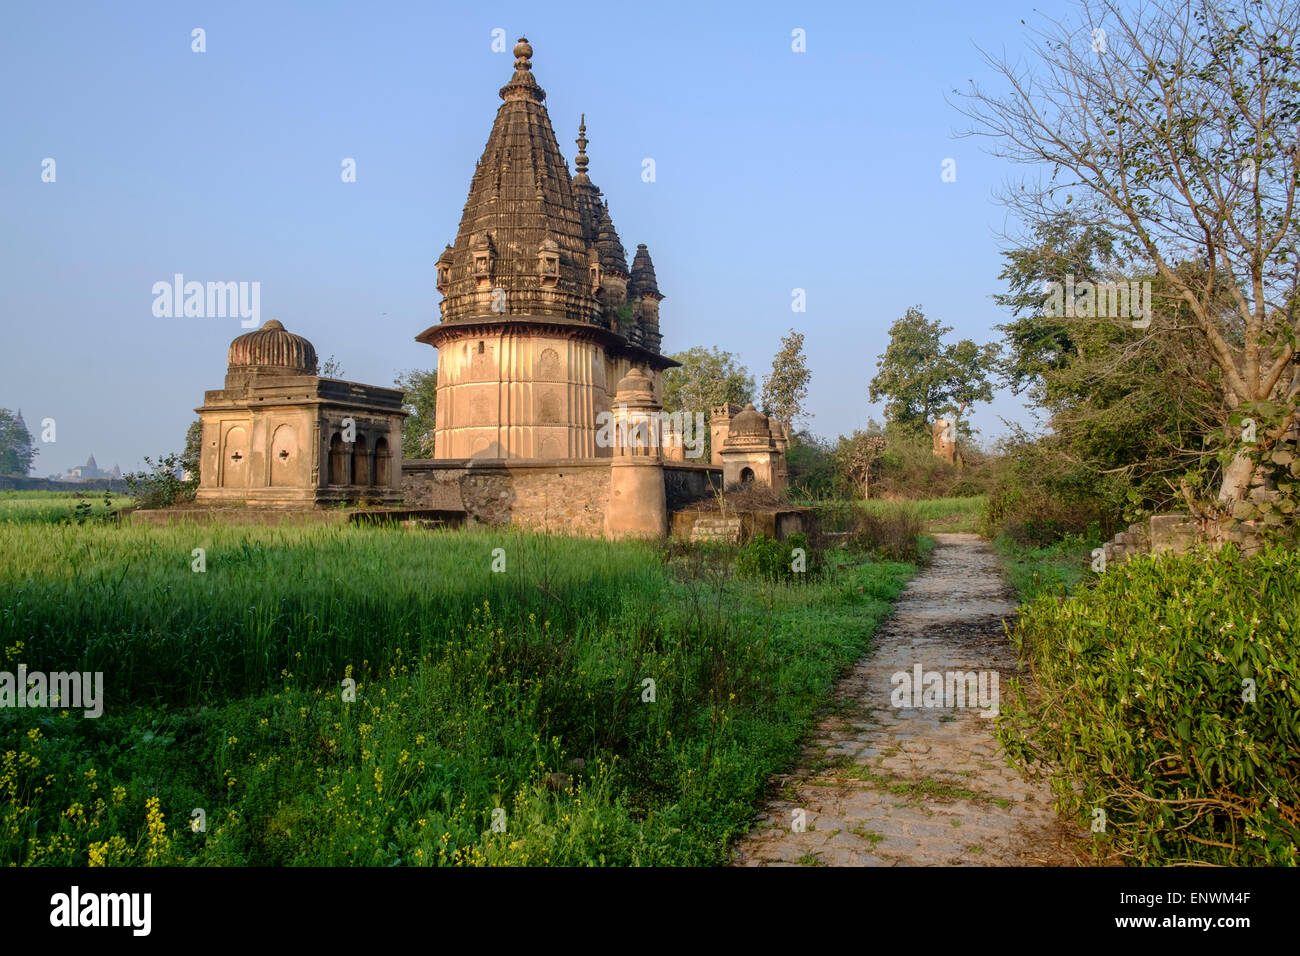 Orchha In Madhya Pradesh State Was Founded In 16th Century And Its Palaces And Temples Still 6312